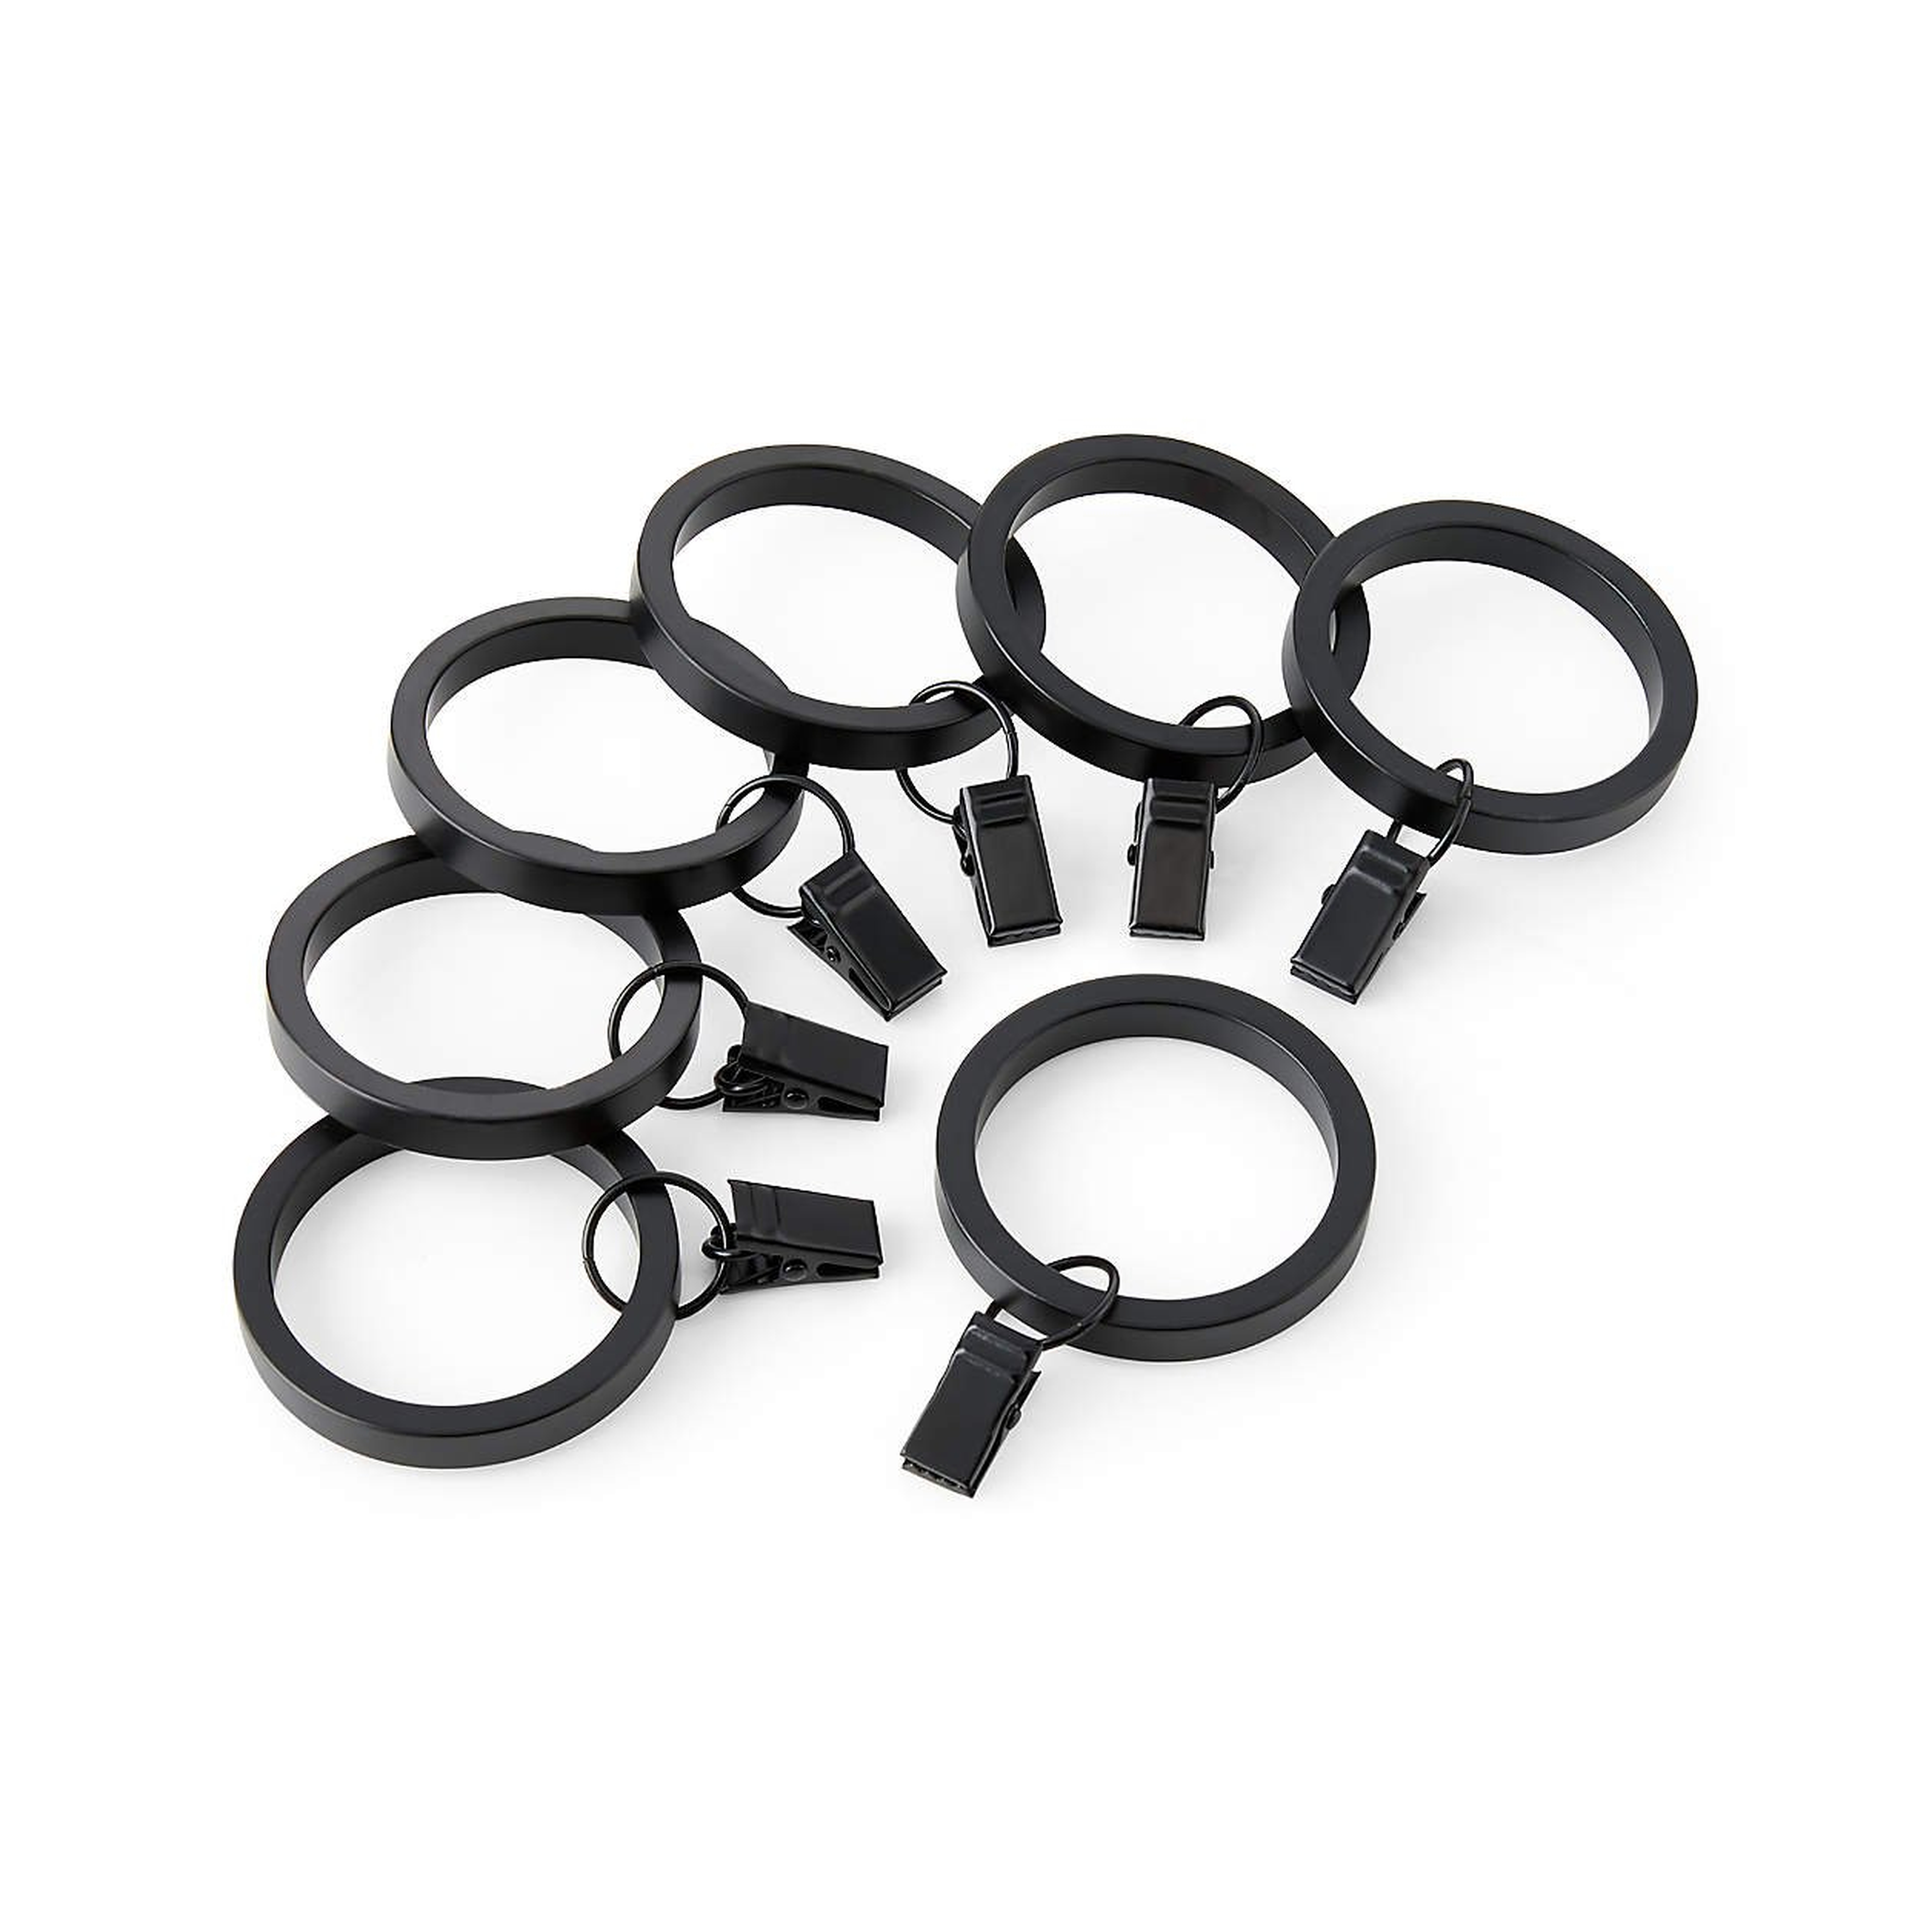 CB Matte Black Curtain Rings, Set of 7 - Crate and Barrel